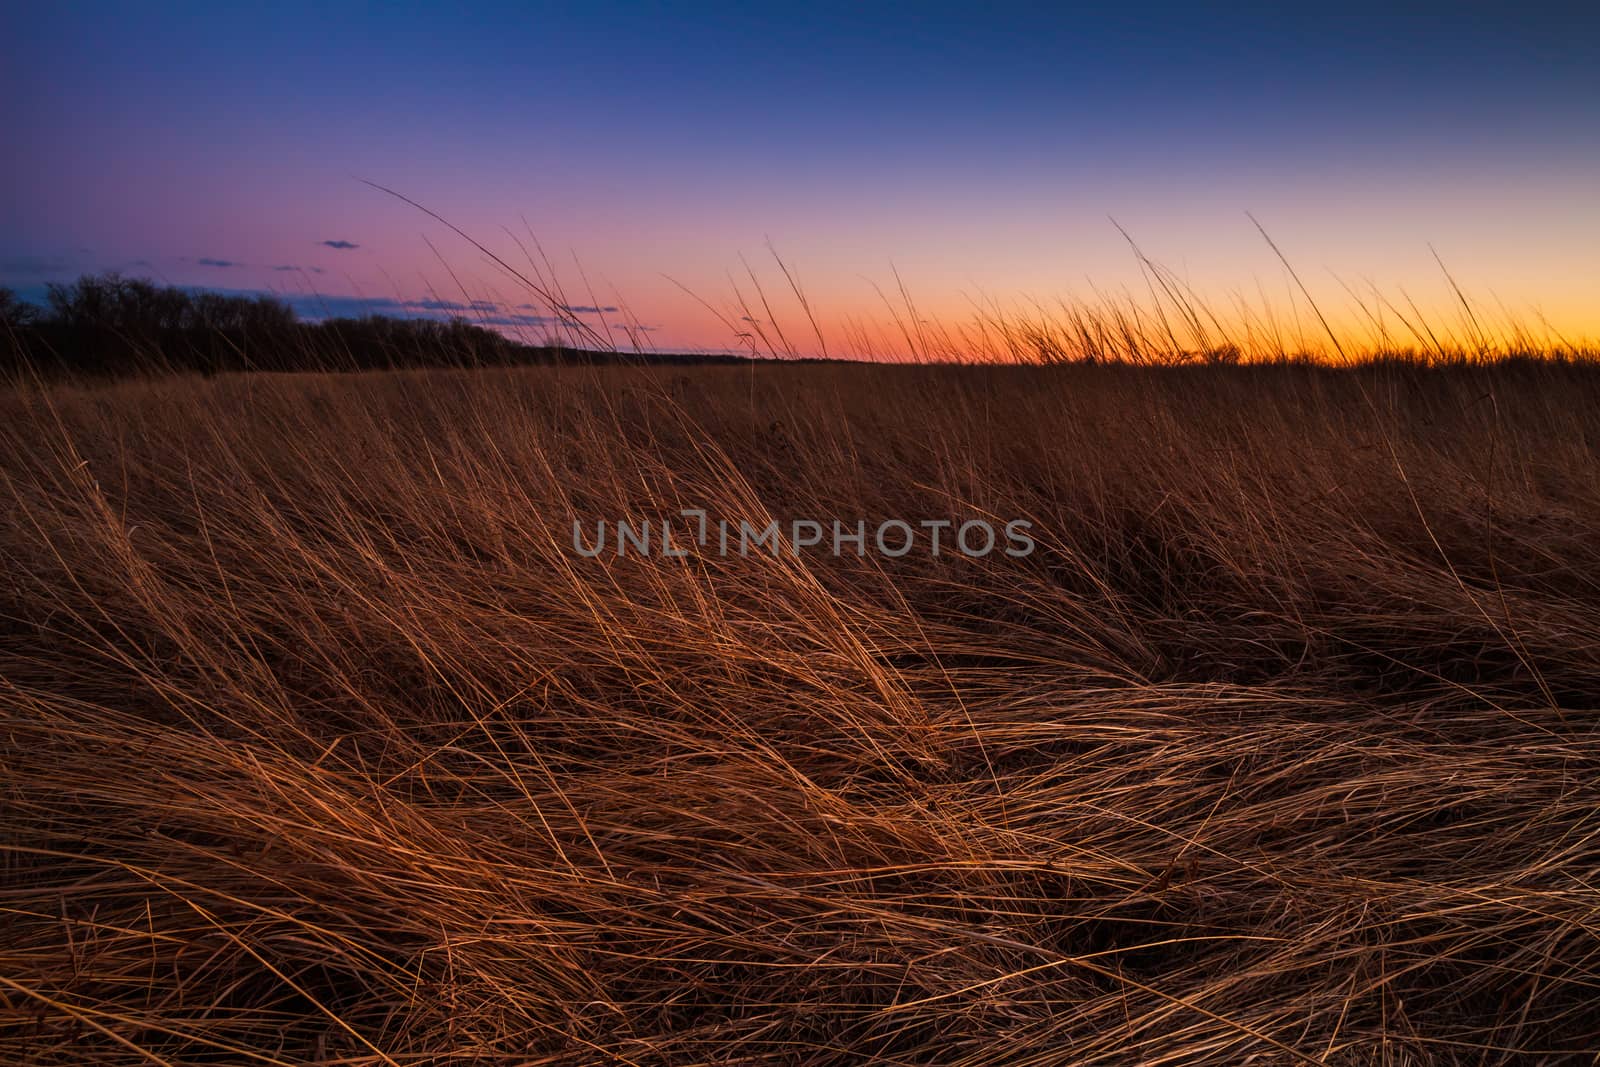 Prairie grass being lit by the sunset in the dusk lighting.